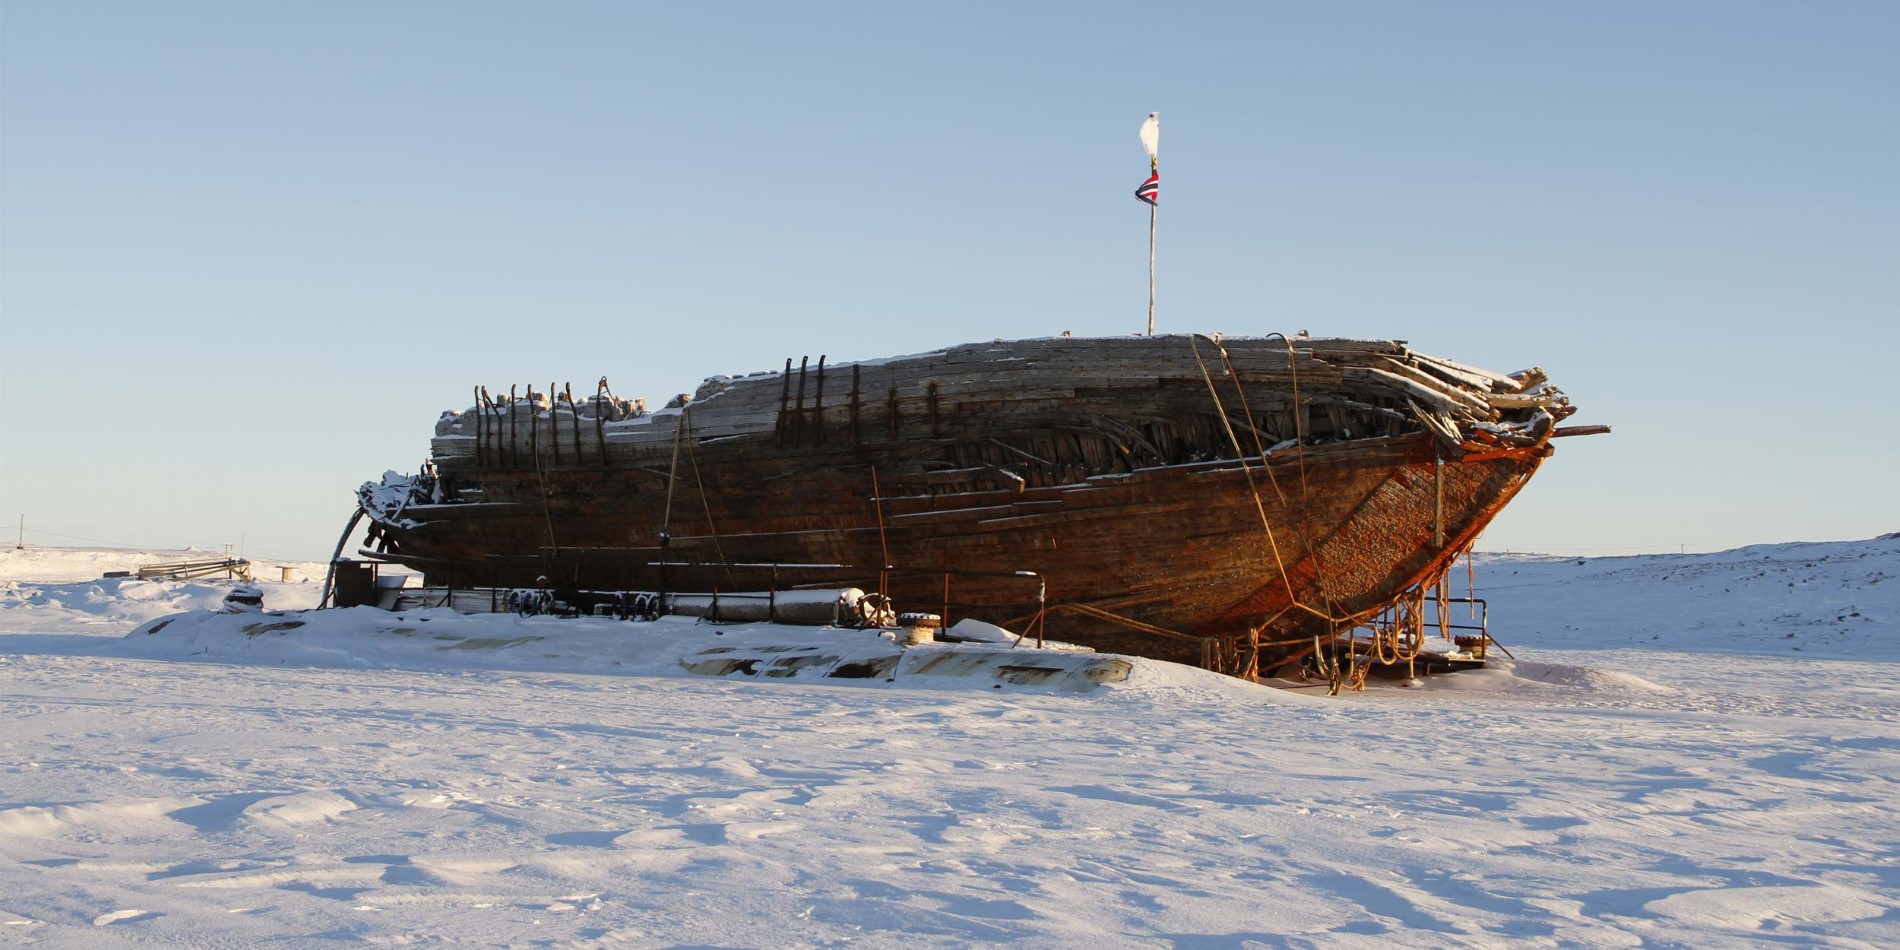 Shipwreck remains of the Maud, near Cambridge Bay, Nunavut, a ship built for Roald Amundsen for his second expedition to the Arctic.